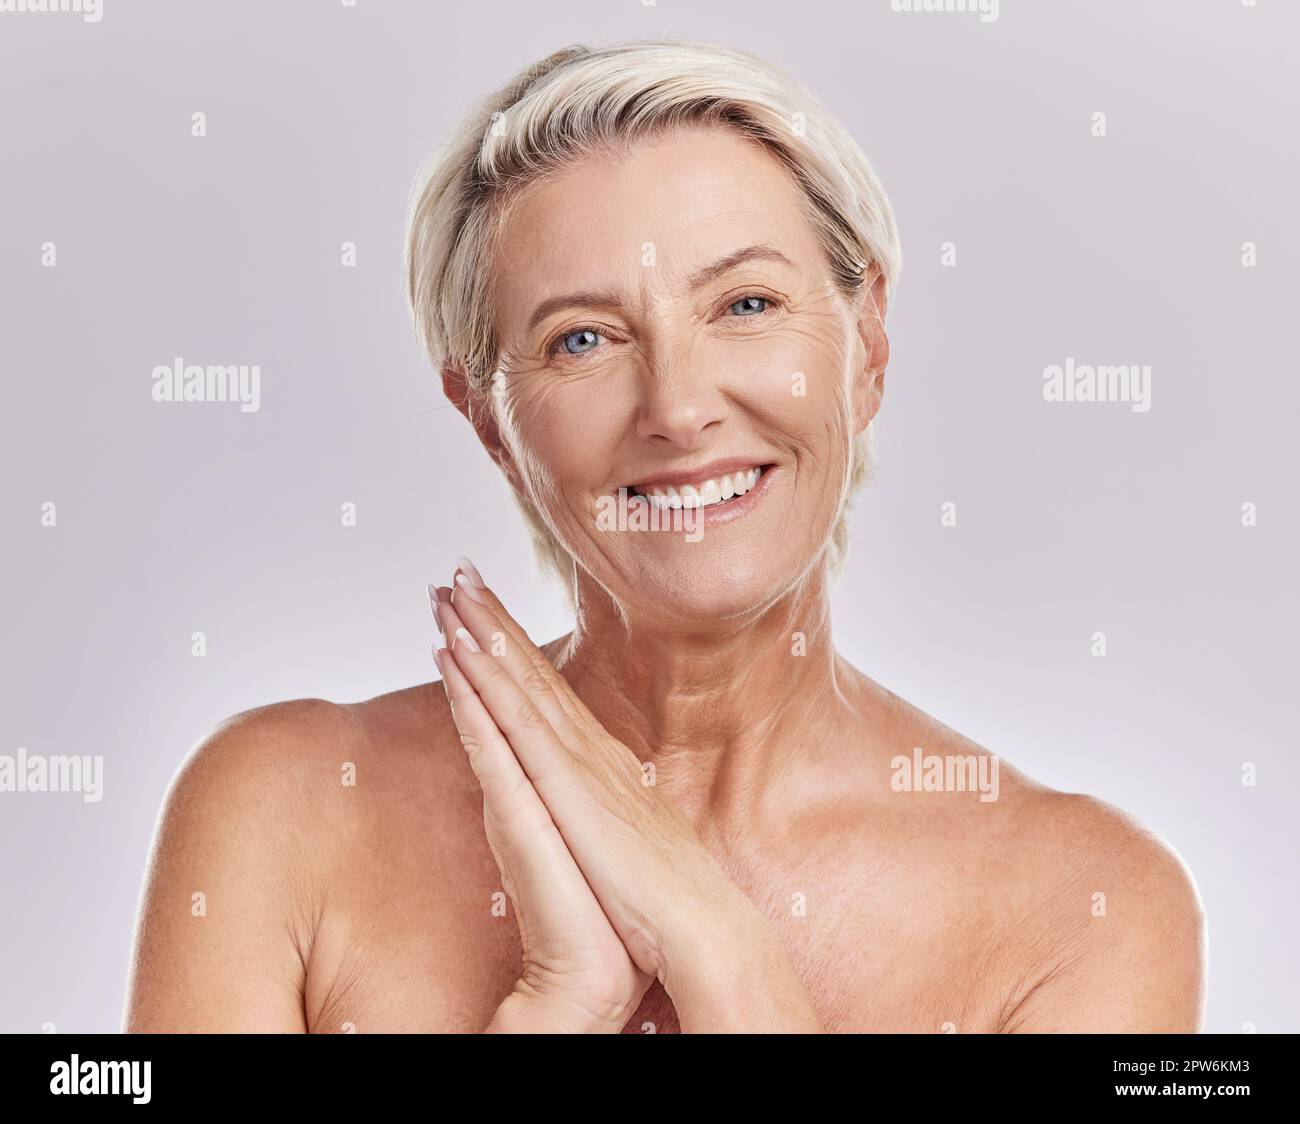 Soft skin, antiaging or wrinkle free senior woman looking happy with her skincare, hygiene and beauty nighttime or bedtime routine. Beautiful, wellnes Stock Photo